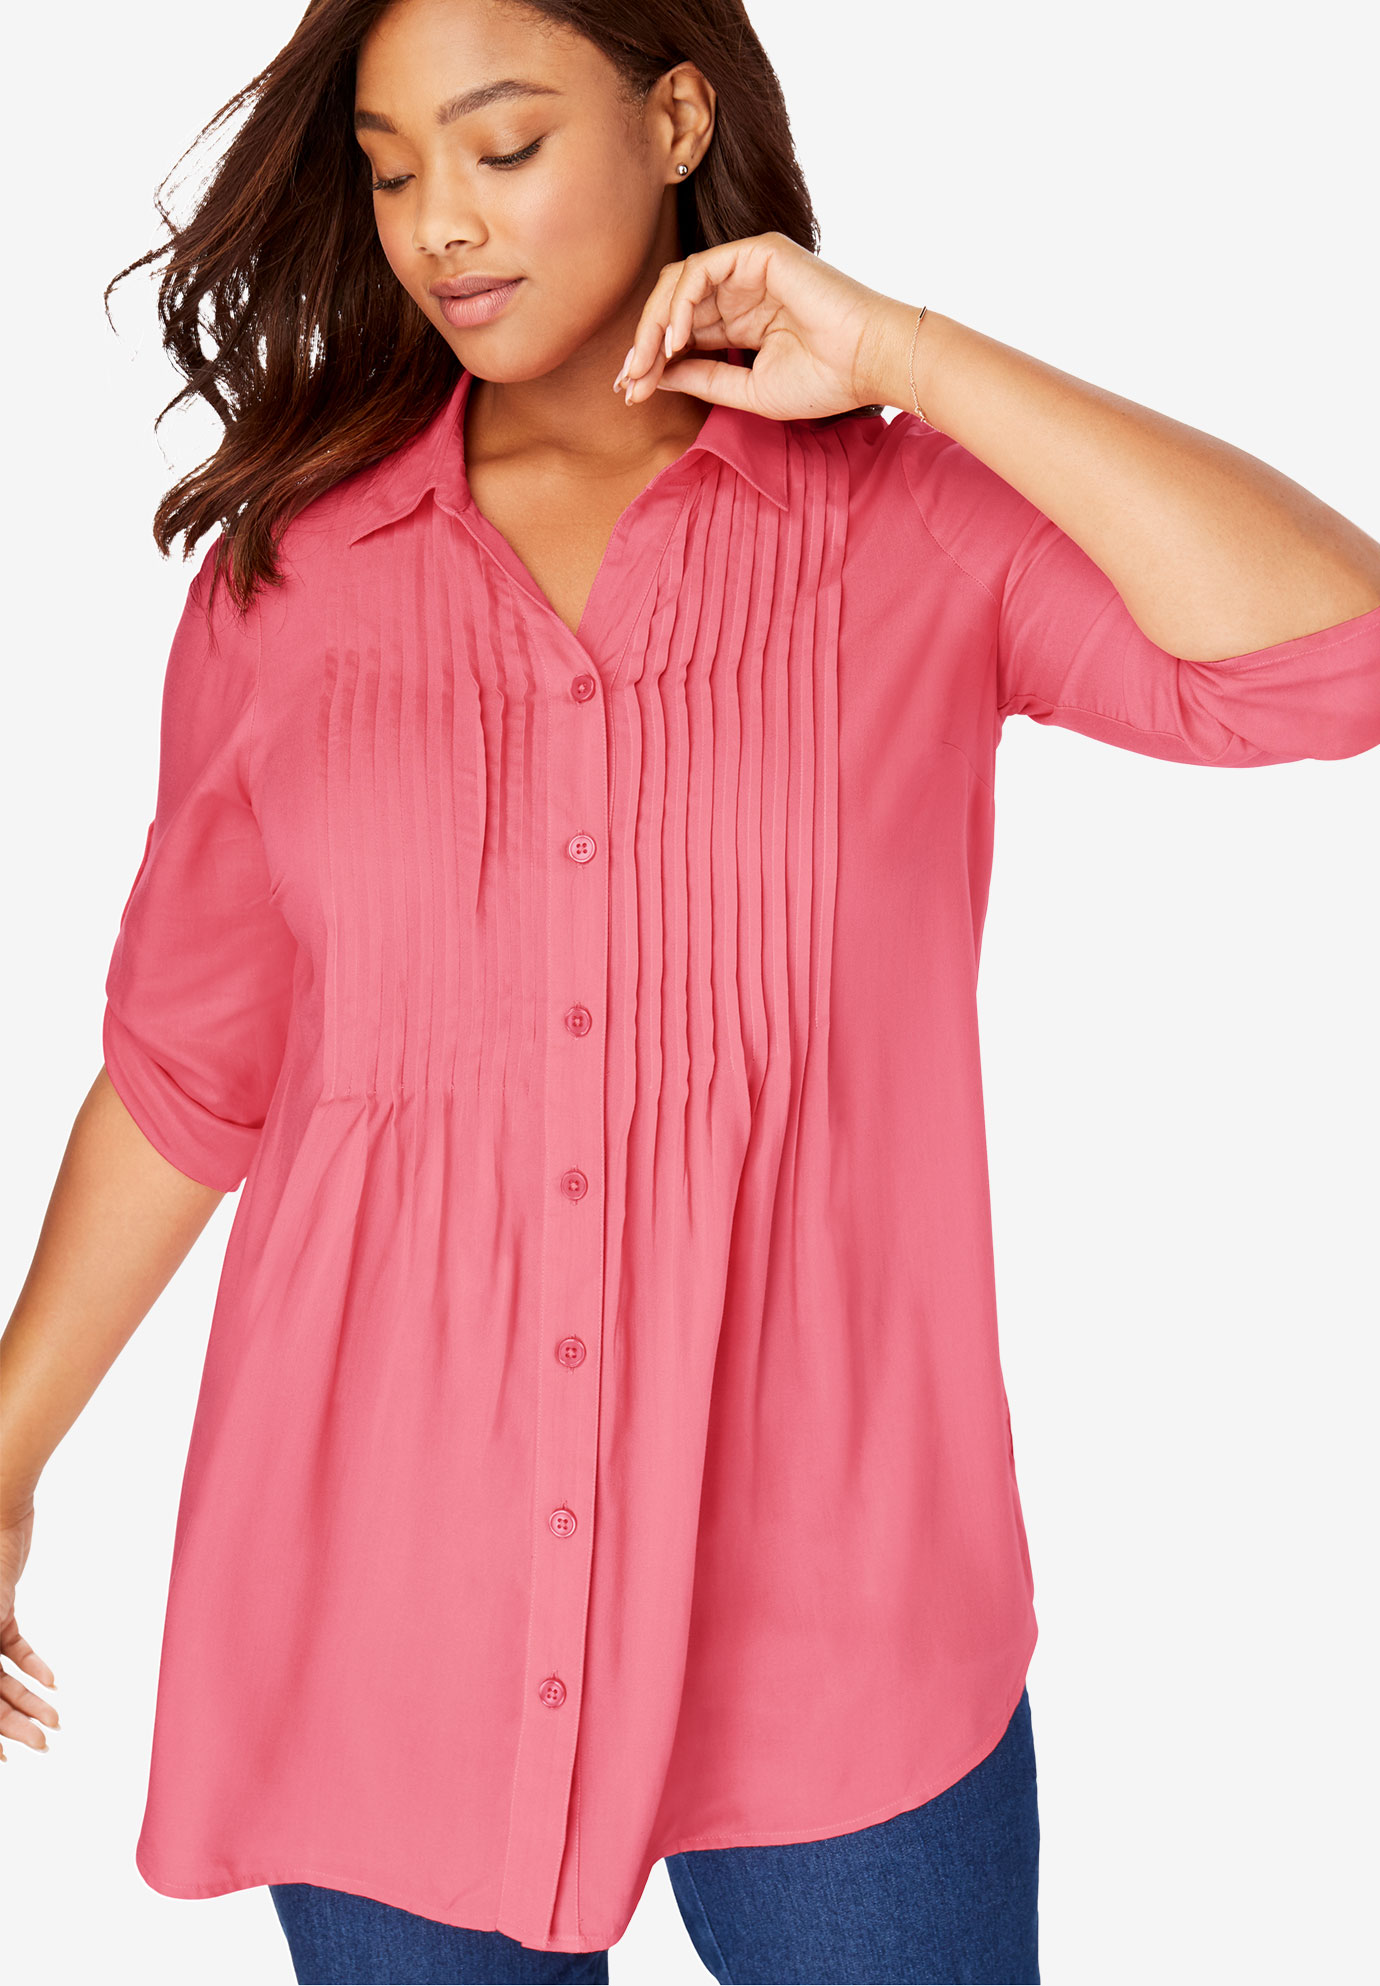 Pintucked Print Tunic Shirt| Plus Size Tops | Woman Within